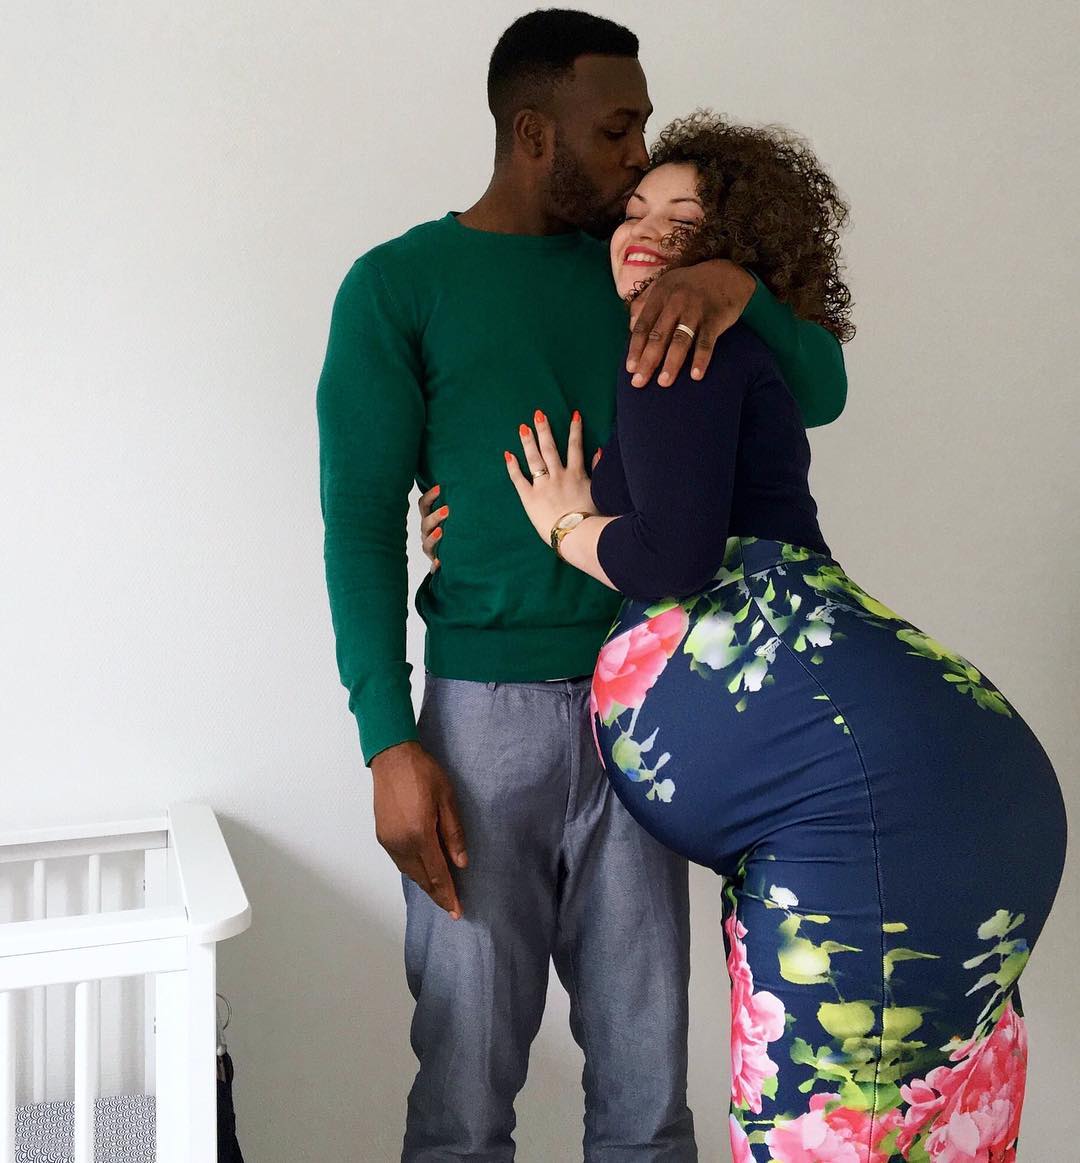 "She Carry Belle For Front & Back" - People React To Lady's Cute Maternity Photos